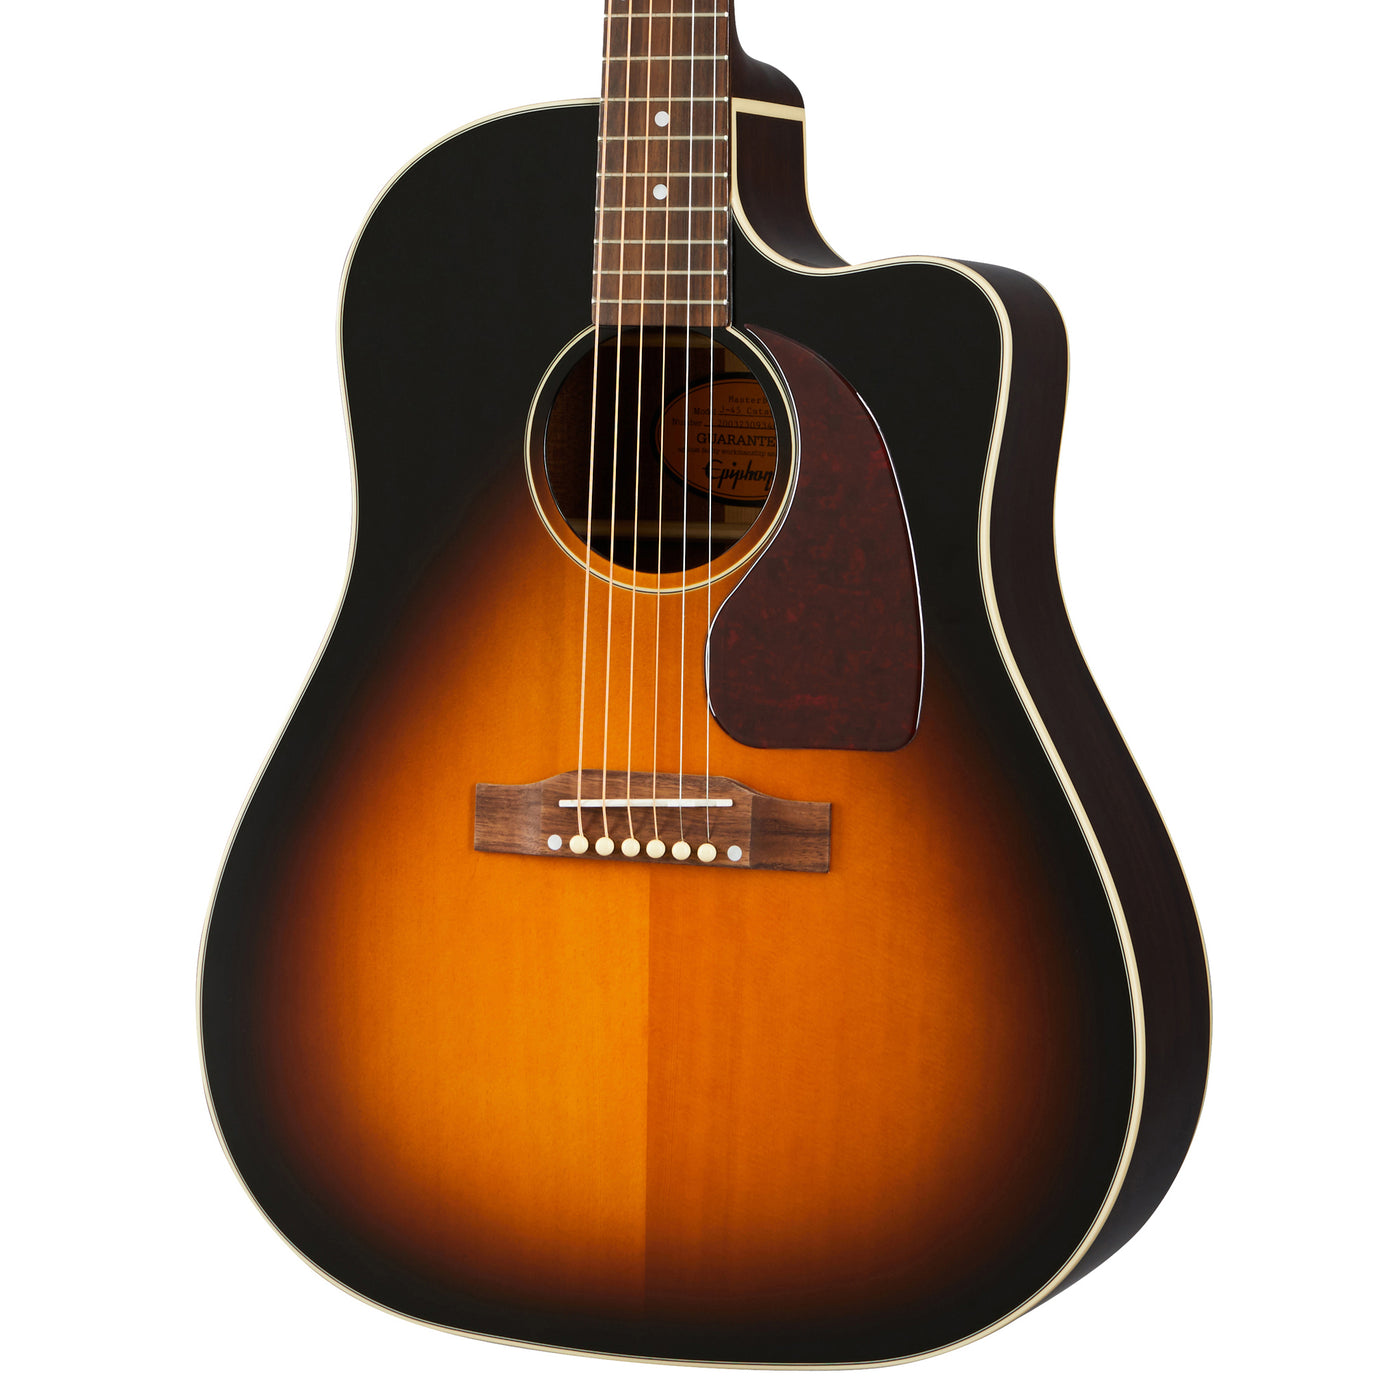 Epiphone Inspired by Gibson J-45 EC Acoustic-Electric Guitar Aged Vintage  Sunburst New